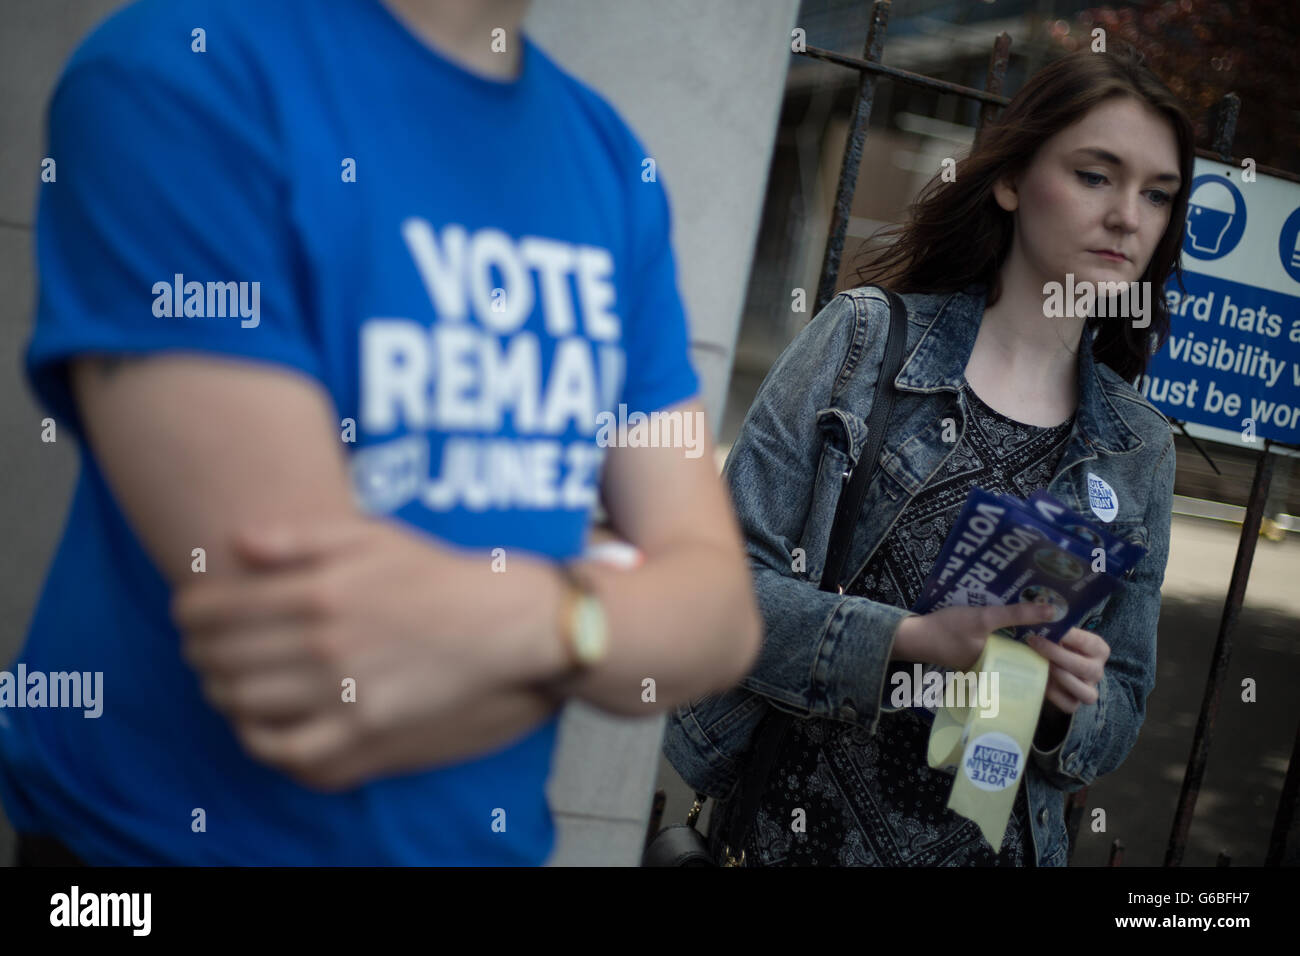 Glasgow, UK. 23rd June, 2016. 'Remain' campaigners, Patrick Bourke (foreground) and Emma Russell, stand distributing leaflets, as voting takes place on the United Kingdom's referendum on European Union membership, outside the Hyndland Primary School voting station in Partick, in Glasgow, Scotland, on 23 June 2016. Credit:  jeremy sutton-hibbert/Alamy Live News Stock Photo